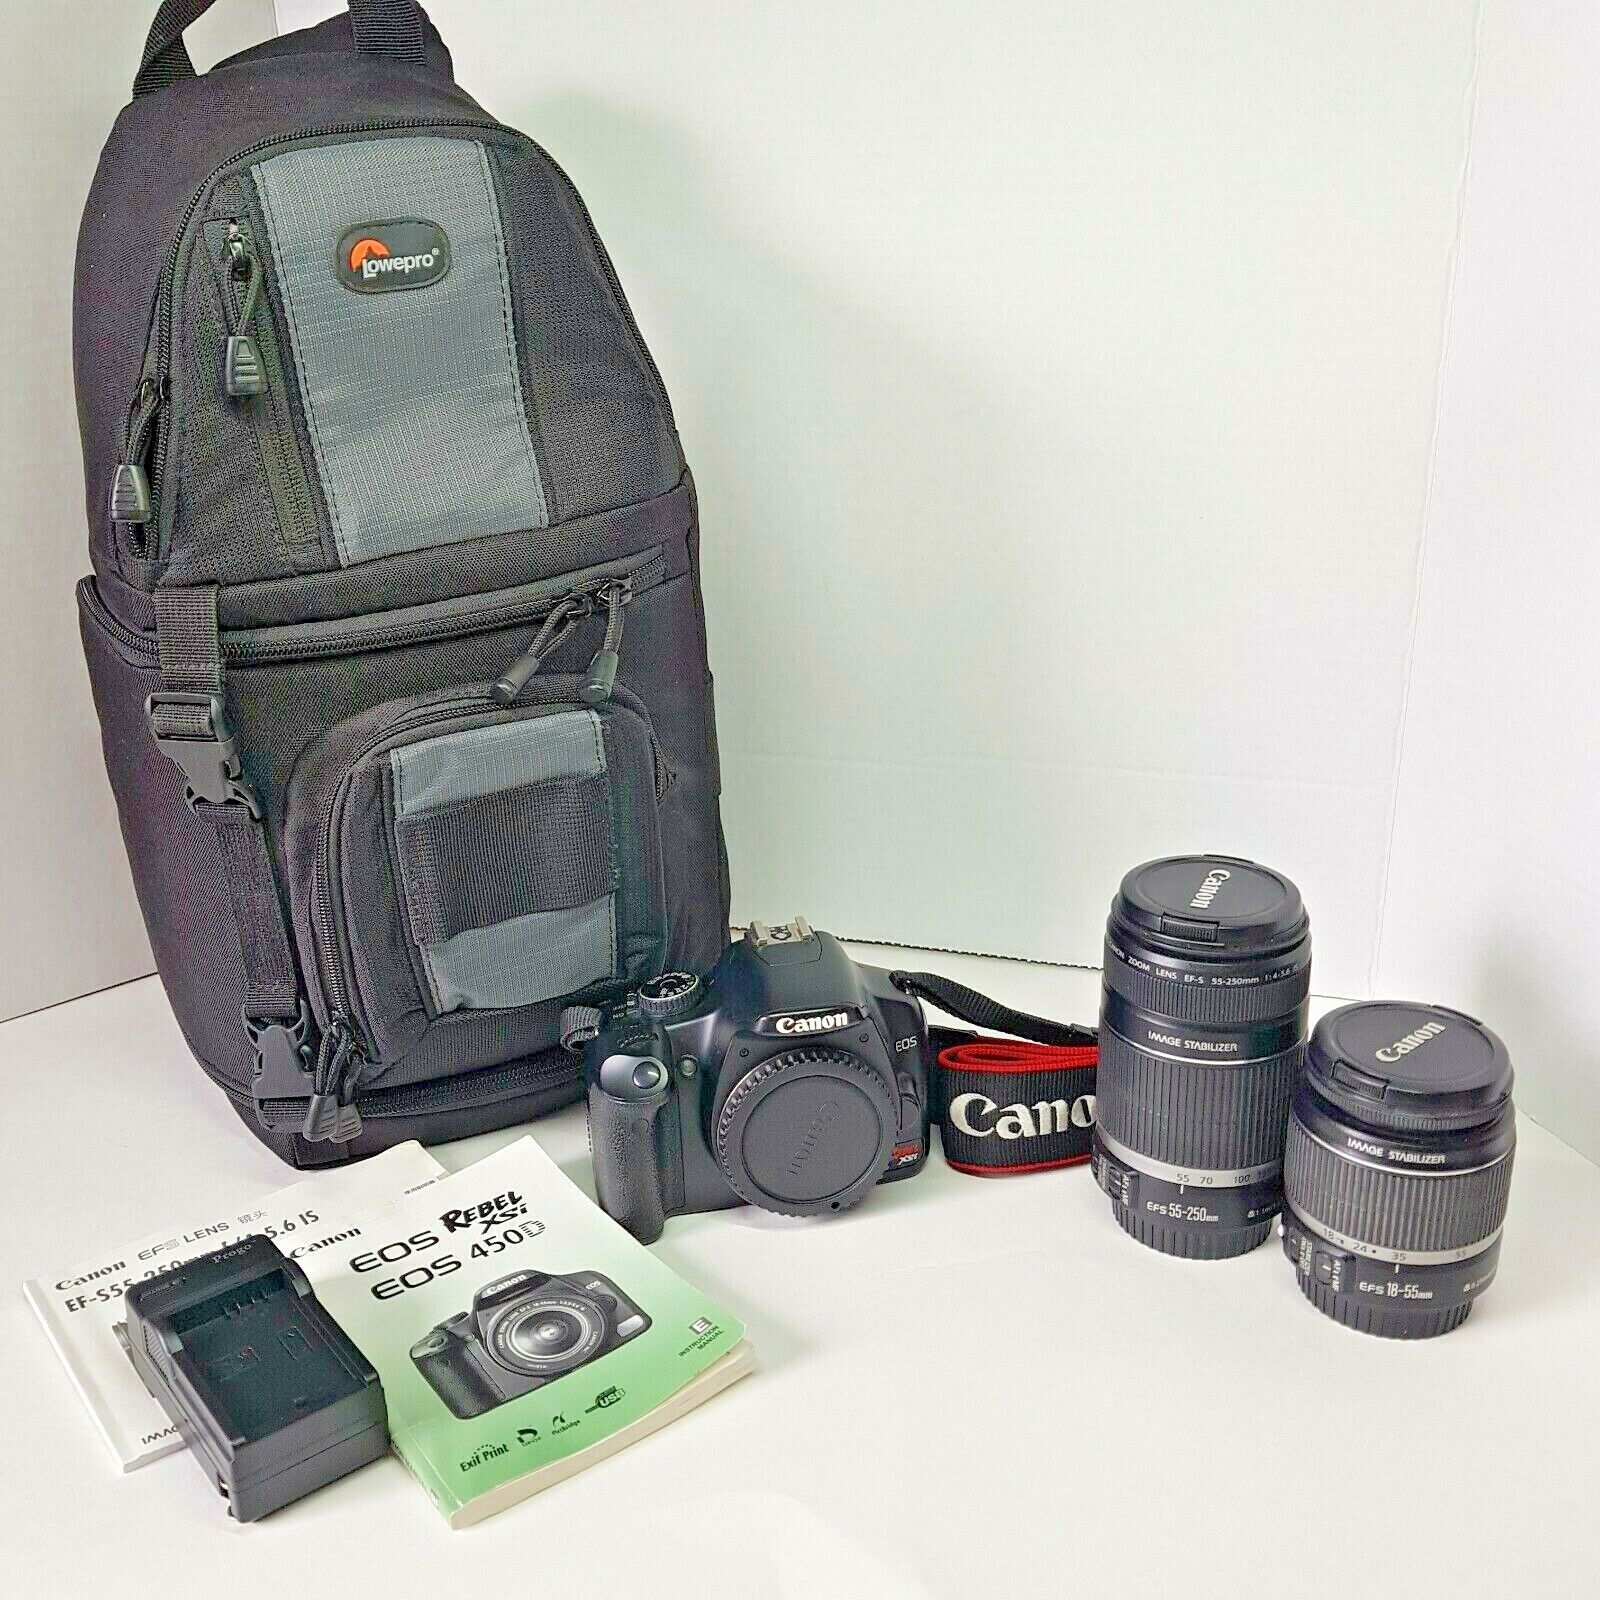 Canon Rebel XSi / 450D DSLR with EFS 18-55mm IS & 55-250mm IS Lenses, Bag & More